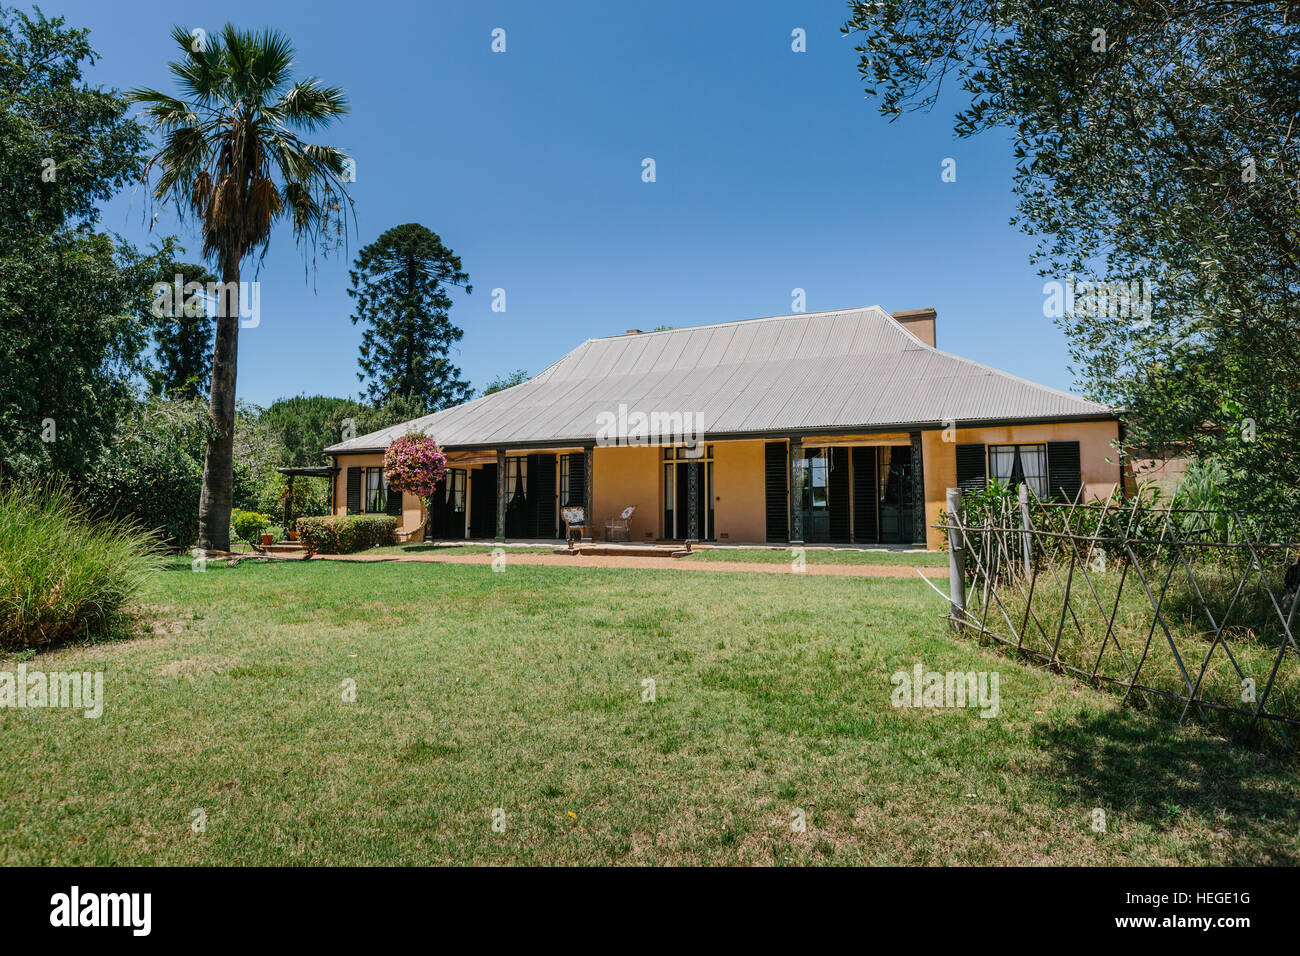 External view of Elizabeth Farm, an historical homestead museum in Sydney, Australia built for Governor Macarthur and his family Stock Photo